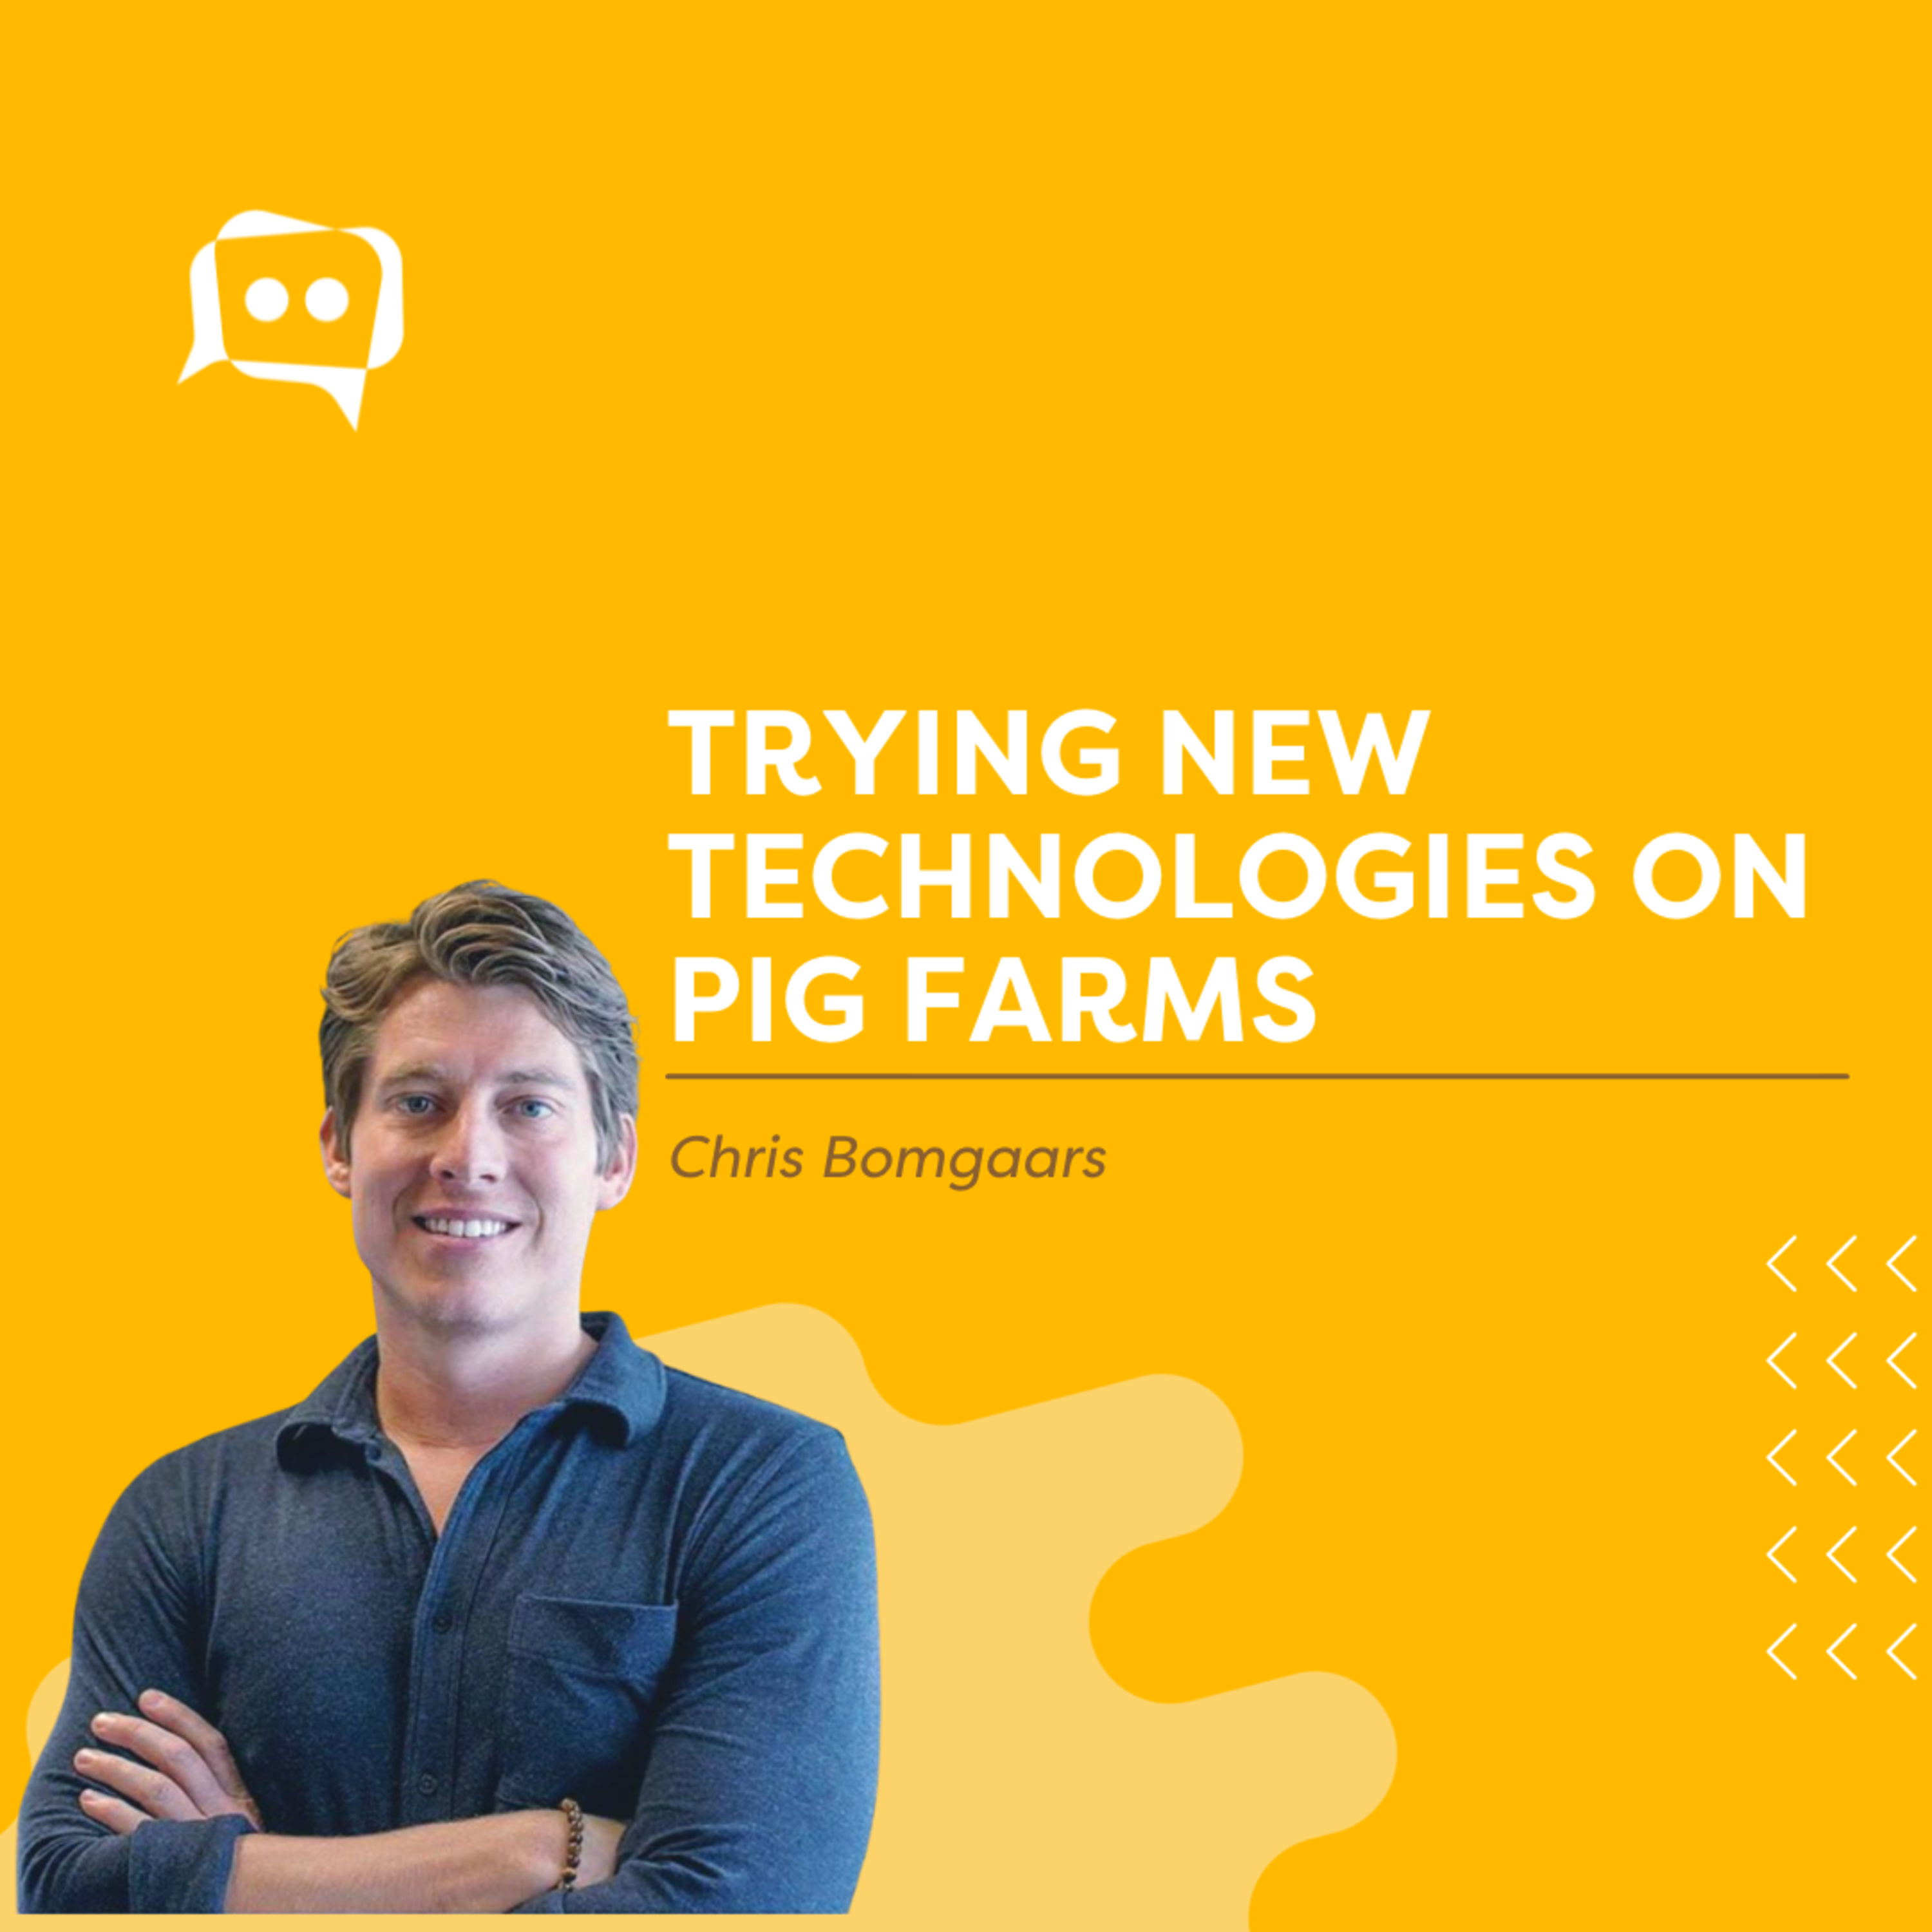 #SHORTS: Trying new technologies on pig farms, with Chris Bomgaars